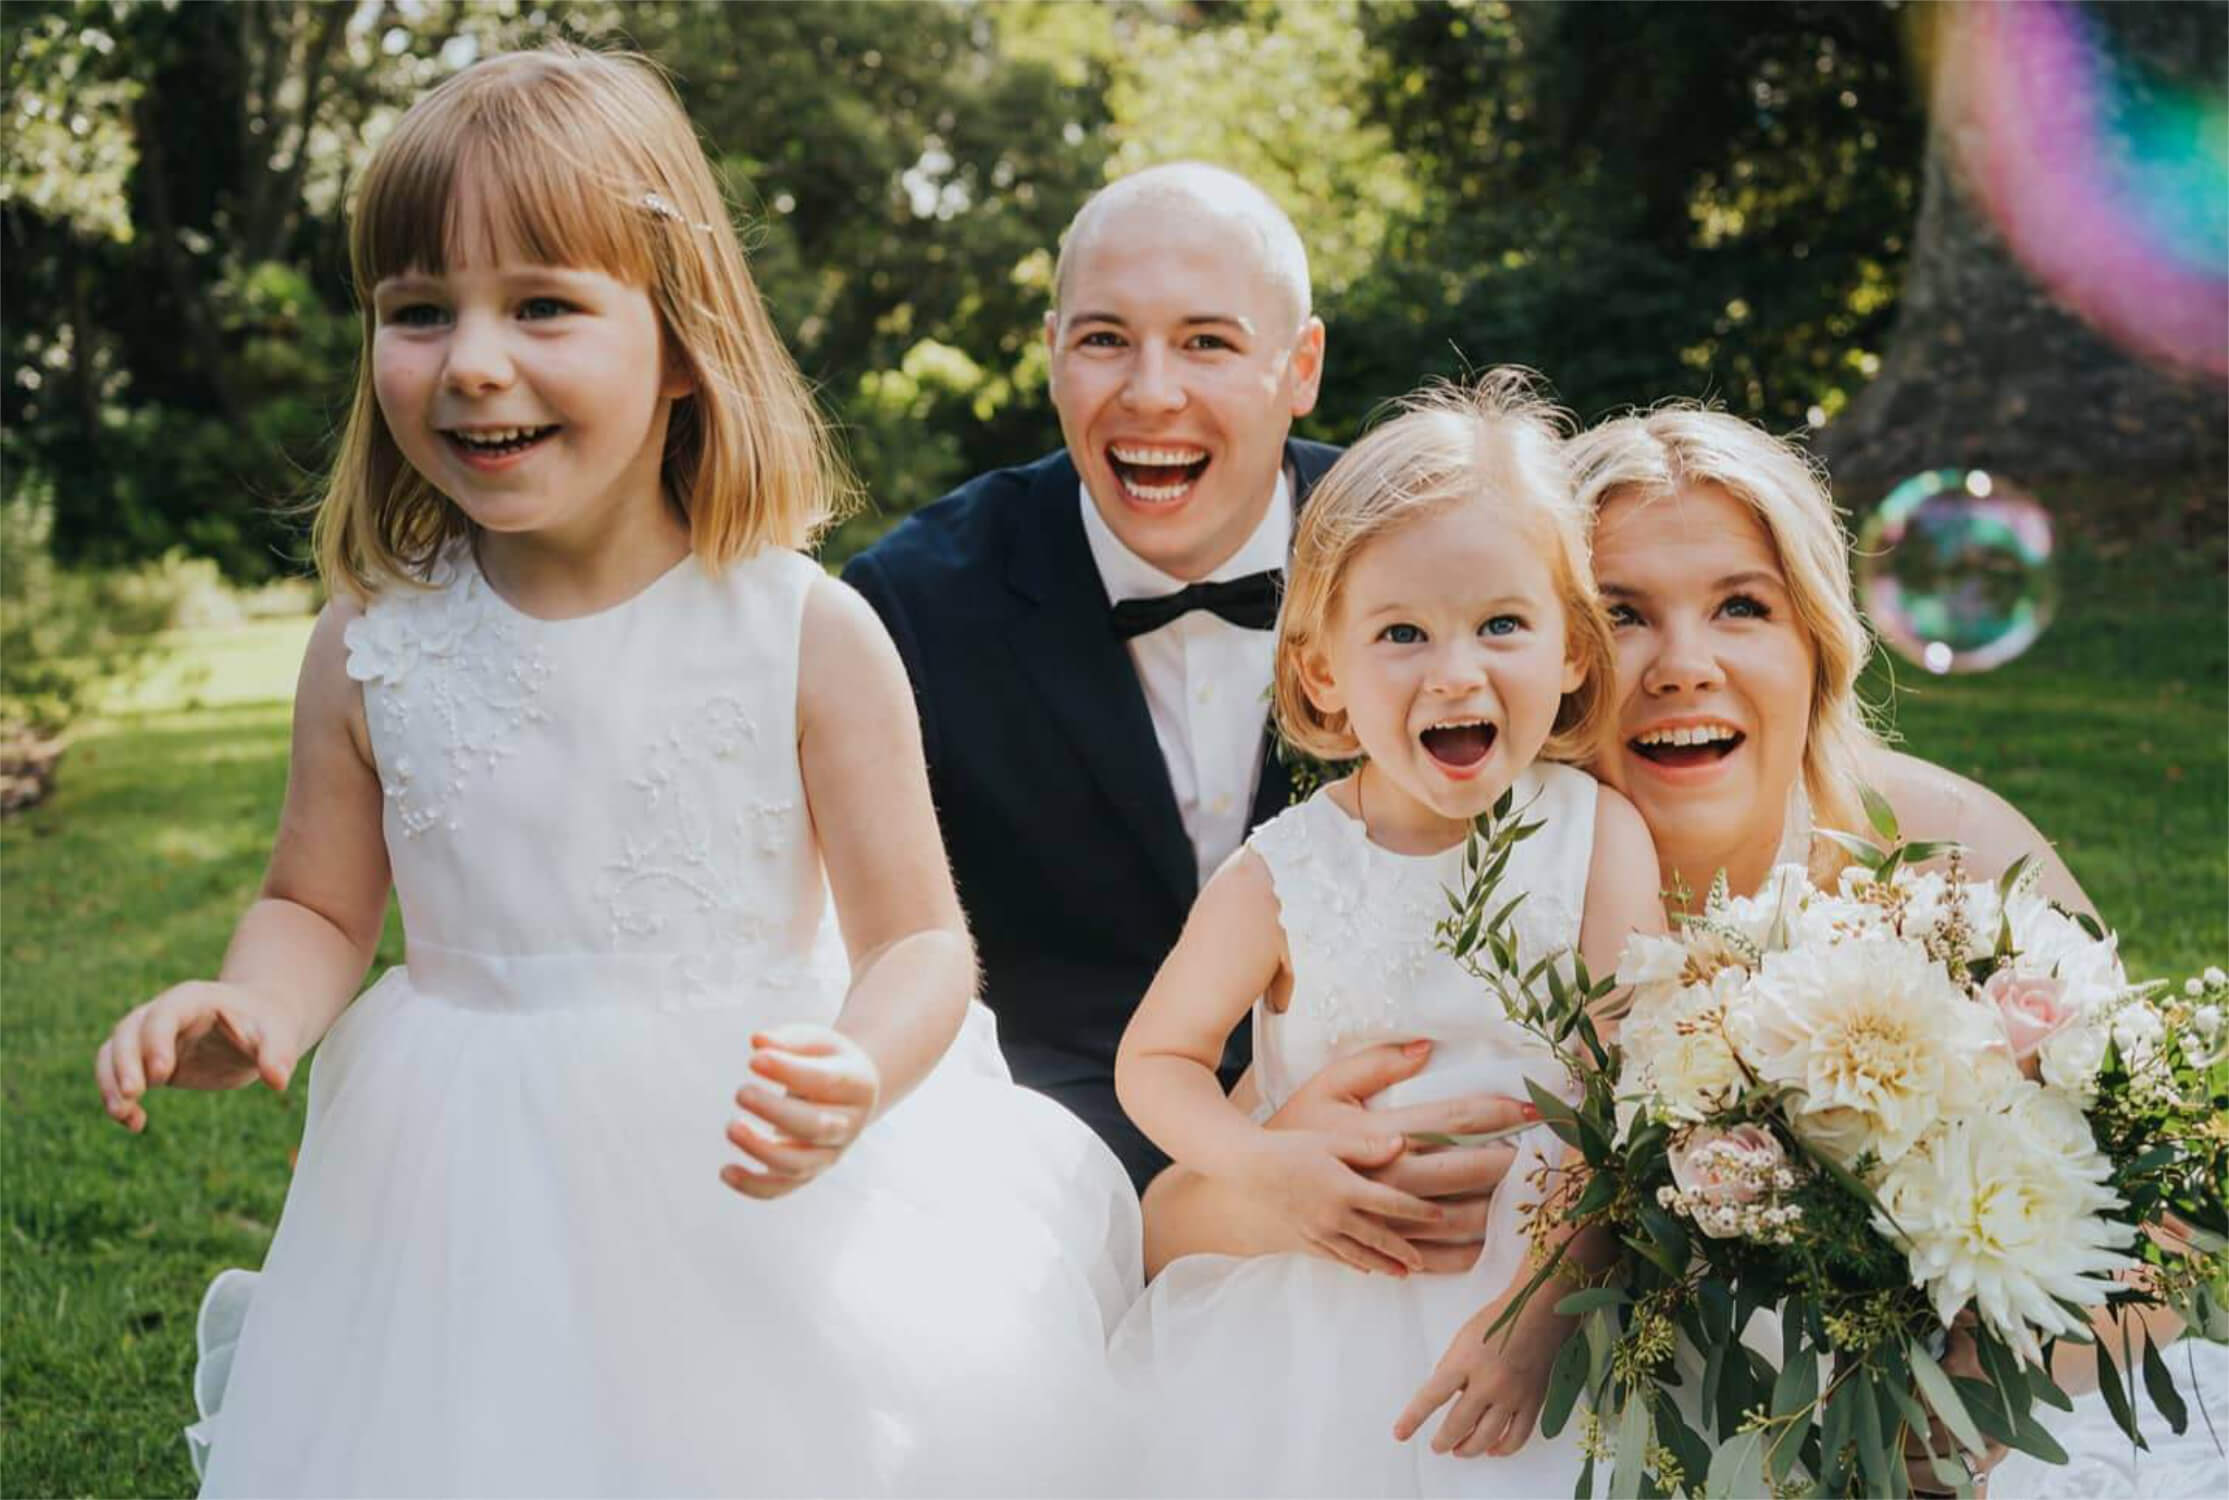 Wedding Celebrant Melbourne Near Me Sharon Munro Weddings The Hitched Collective